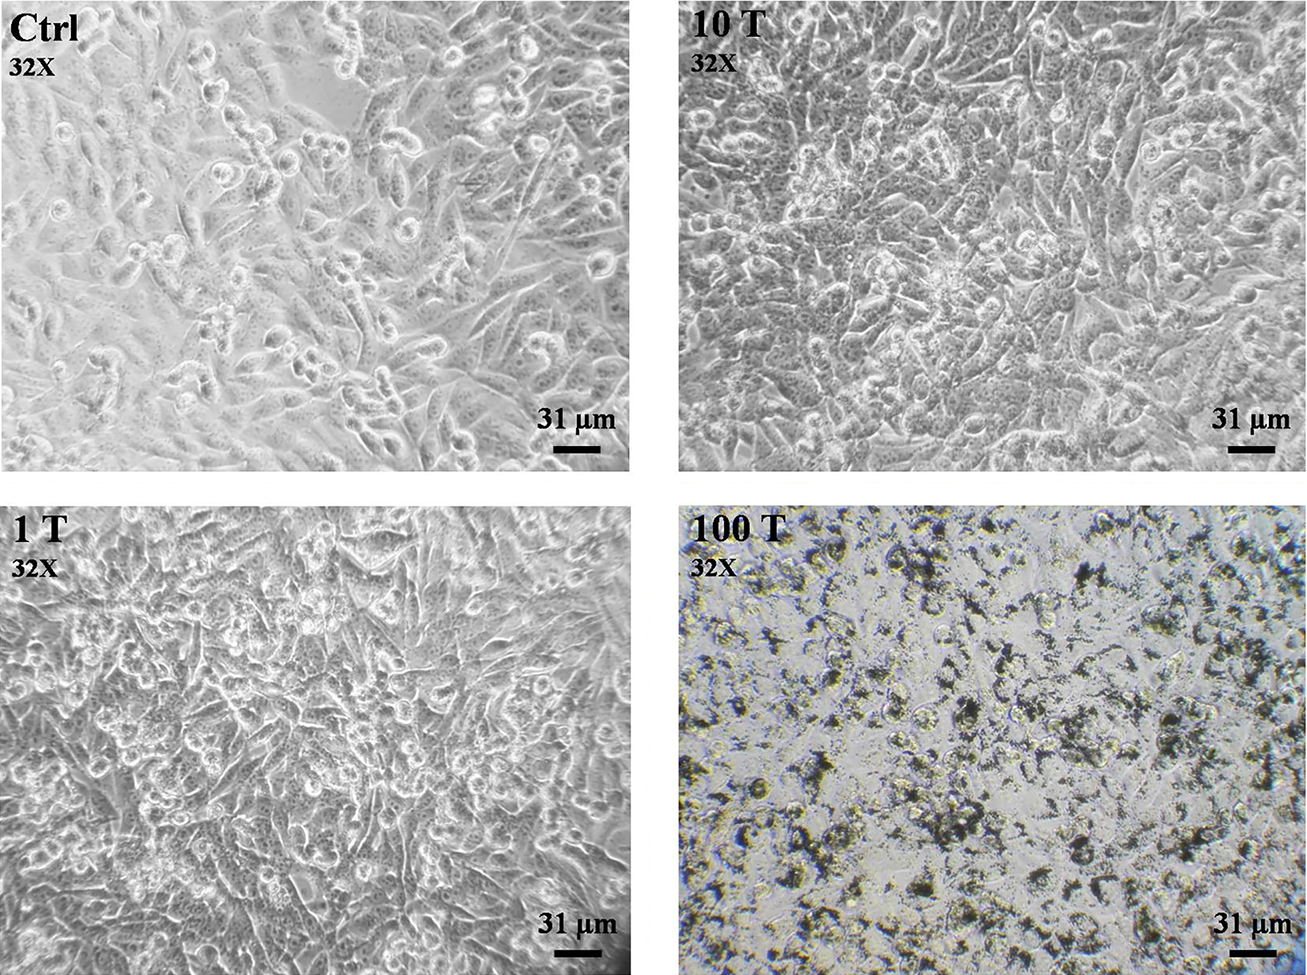 Morphological study of A375 cells exposed to TiO2 NPs. Cells were treated with different concentrations of TiO2 NPs (1 - 100 μg/mL) for 24 hours and morphological changes were studied by an inverted light microscope (magnification 32X).